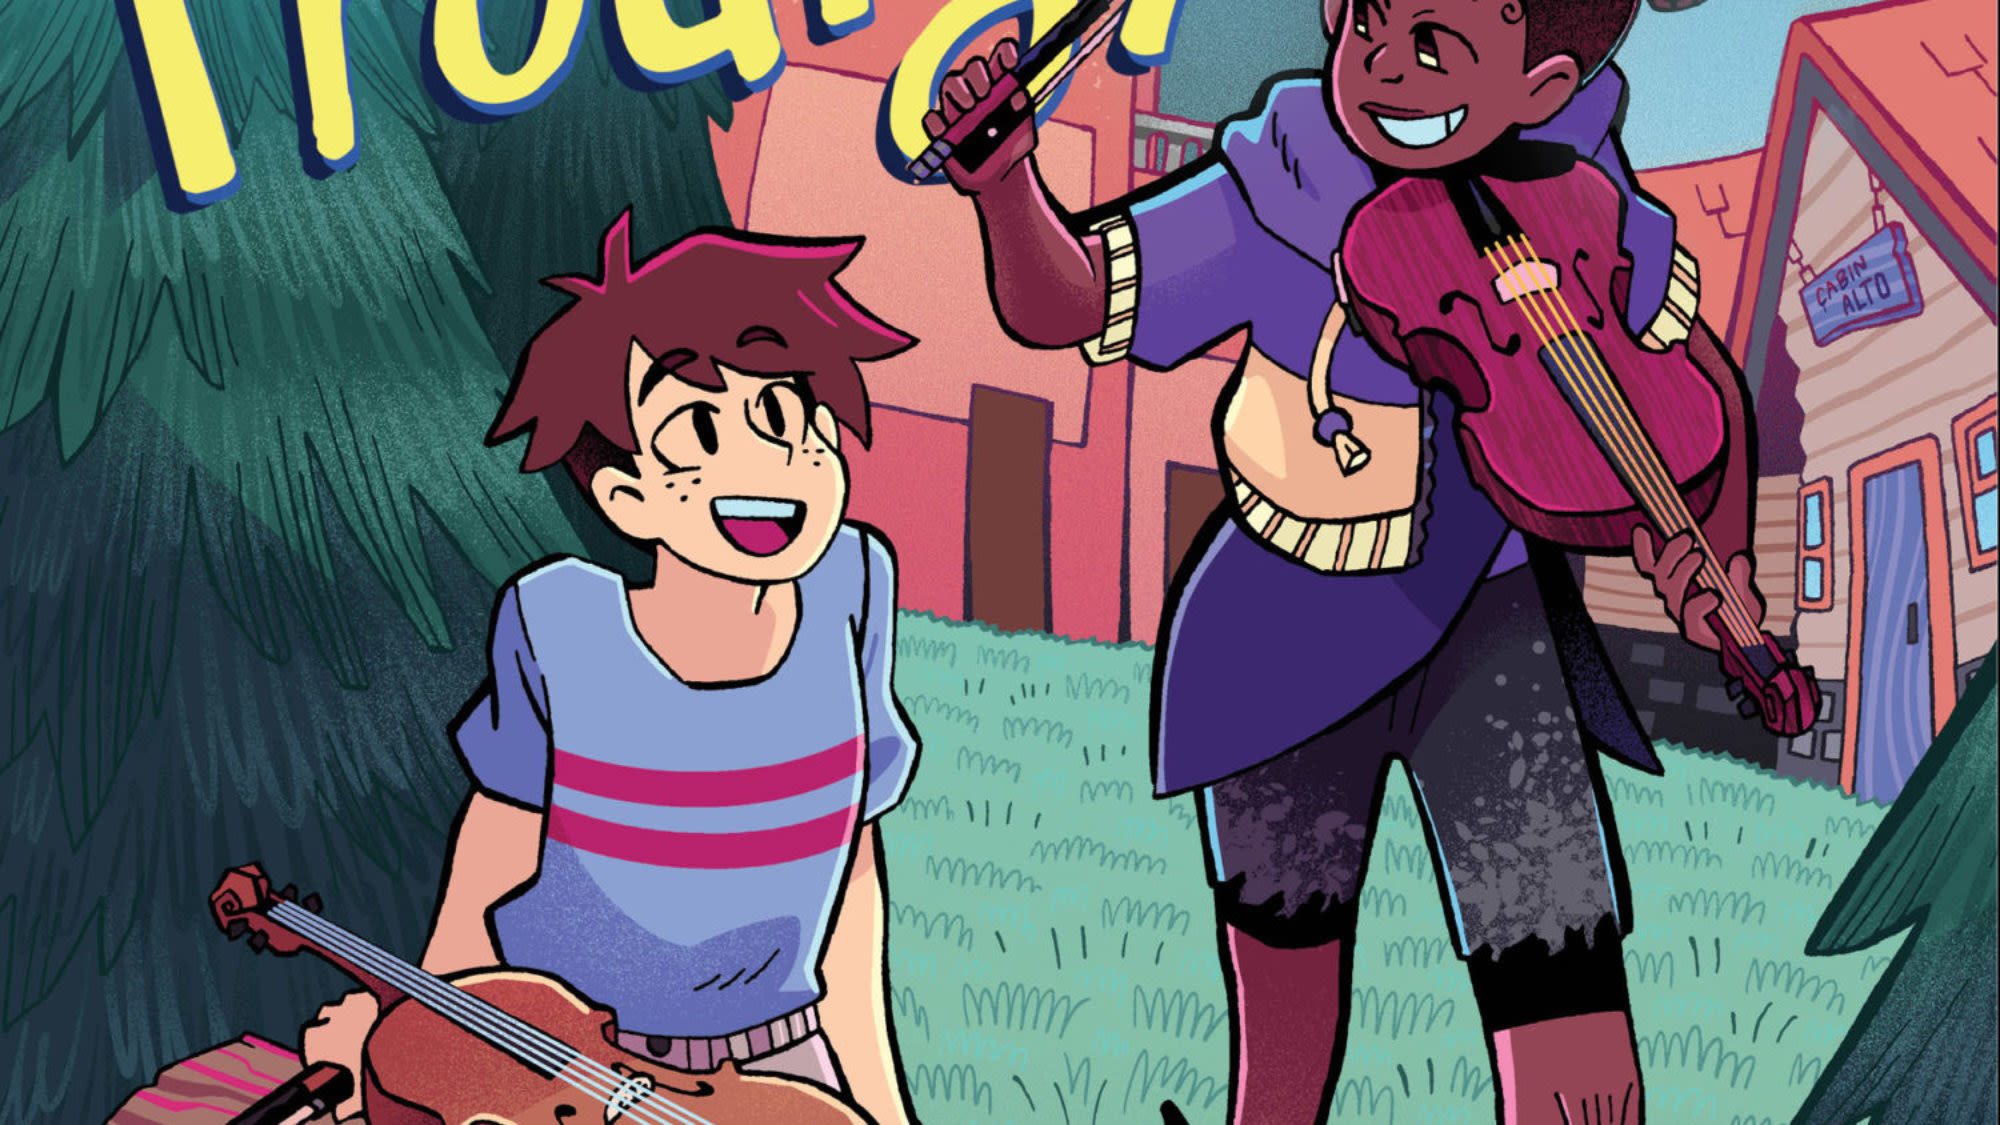 Camp Prodigy: A Young Readers Tale of Music and Nonbinary Friendship